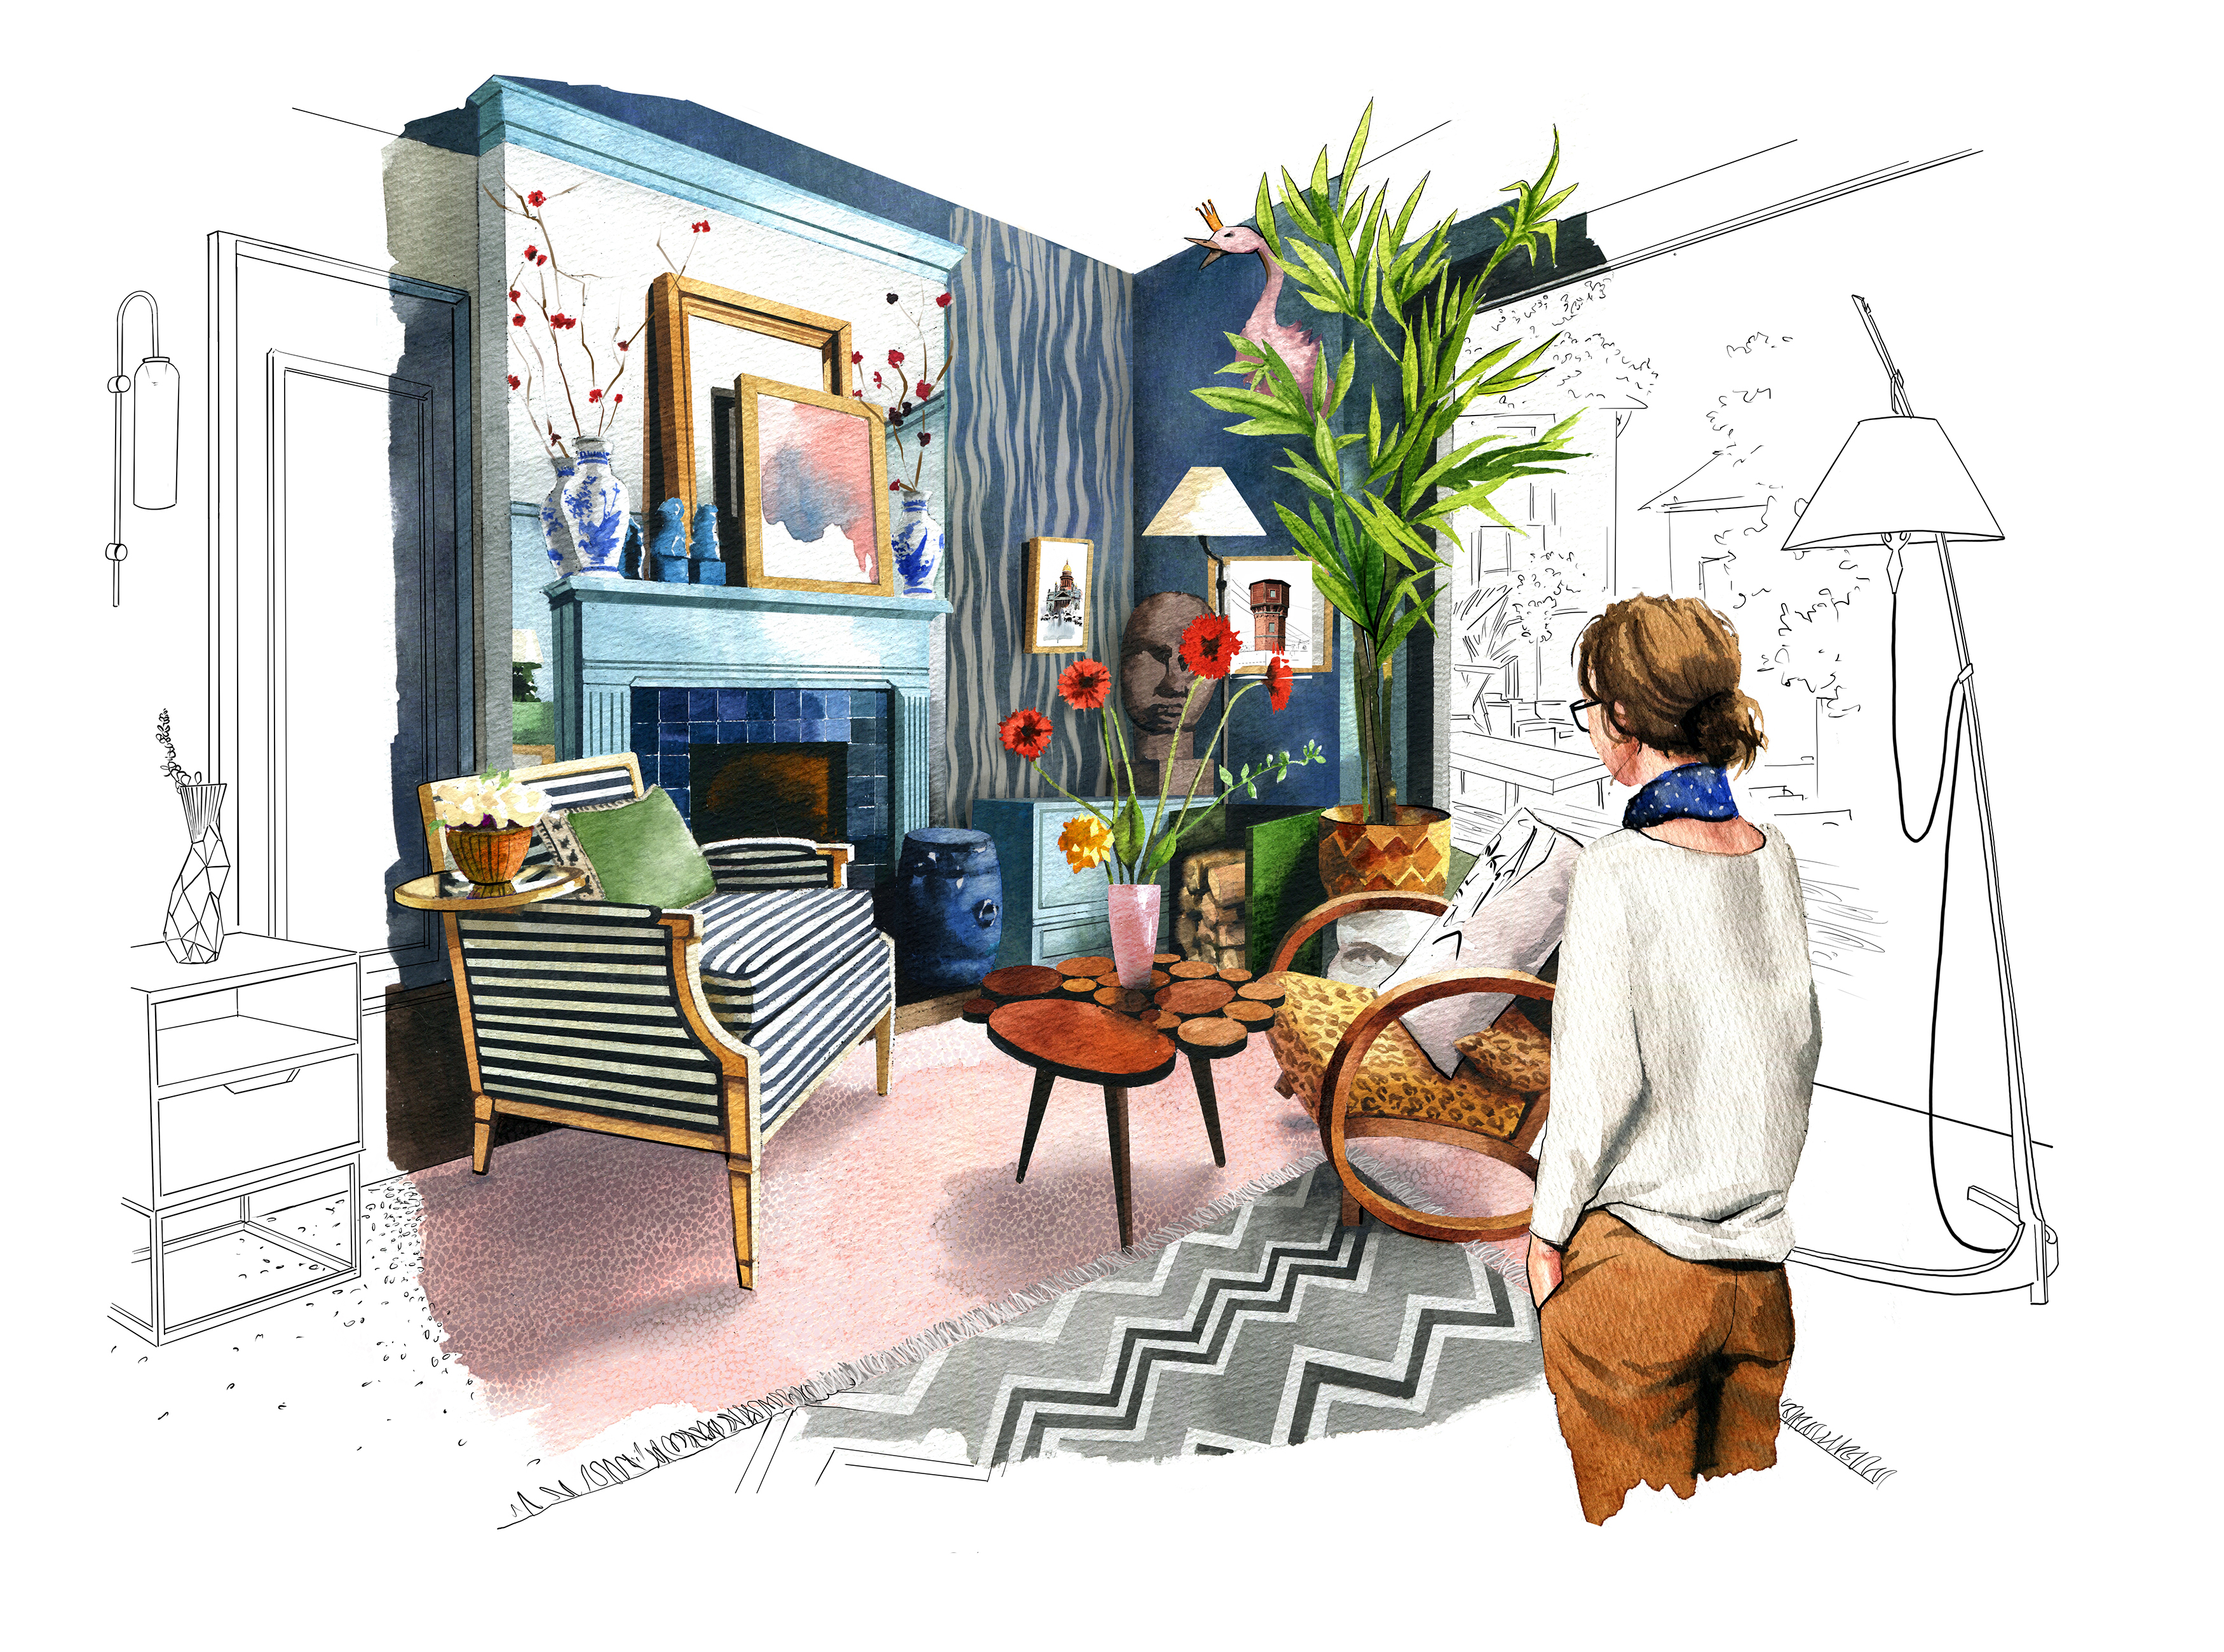 1,566 Home Showcase Interior High Res Illustrations - Getty Images